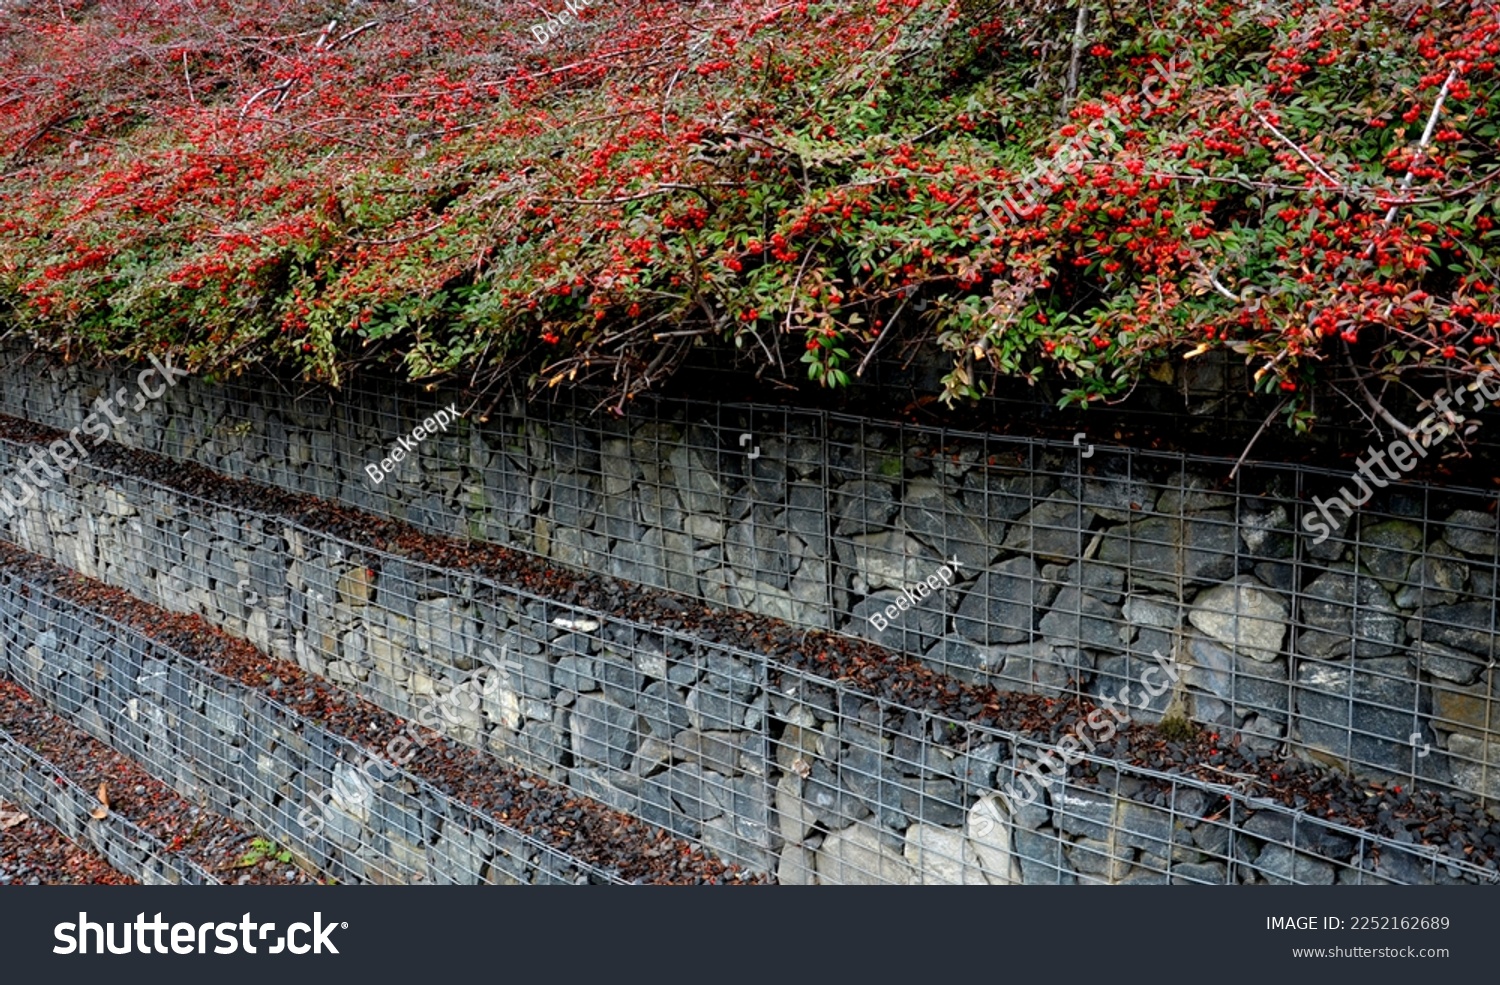 a staircase-like gabion wall is a supporting structure. a rockery bush is growing over it. in autumn it is covered with red fruits. covering plant, overhanging, berry, stone, road side, sidewalk #2252162689